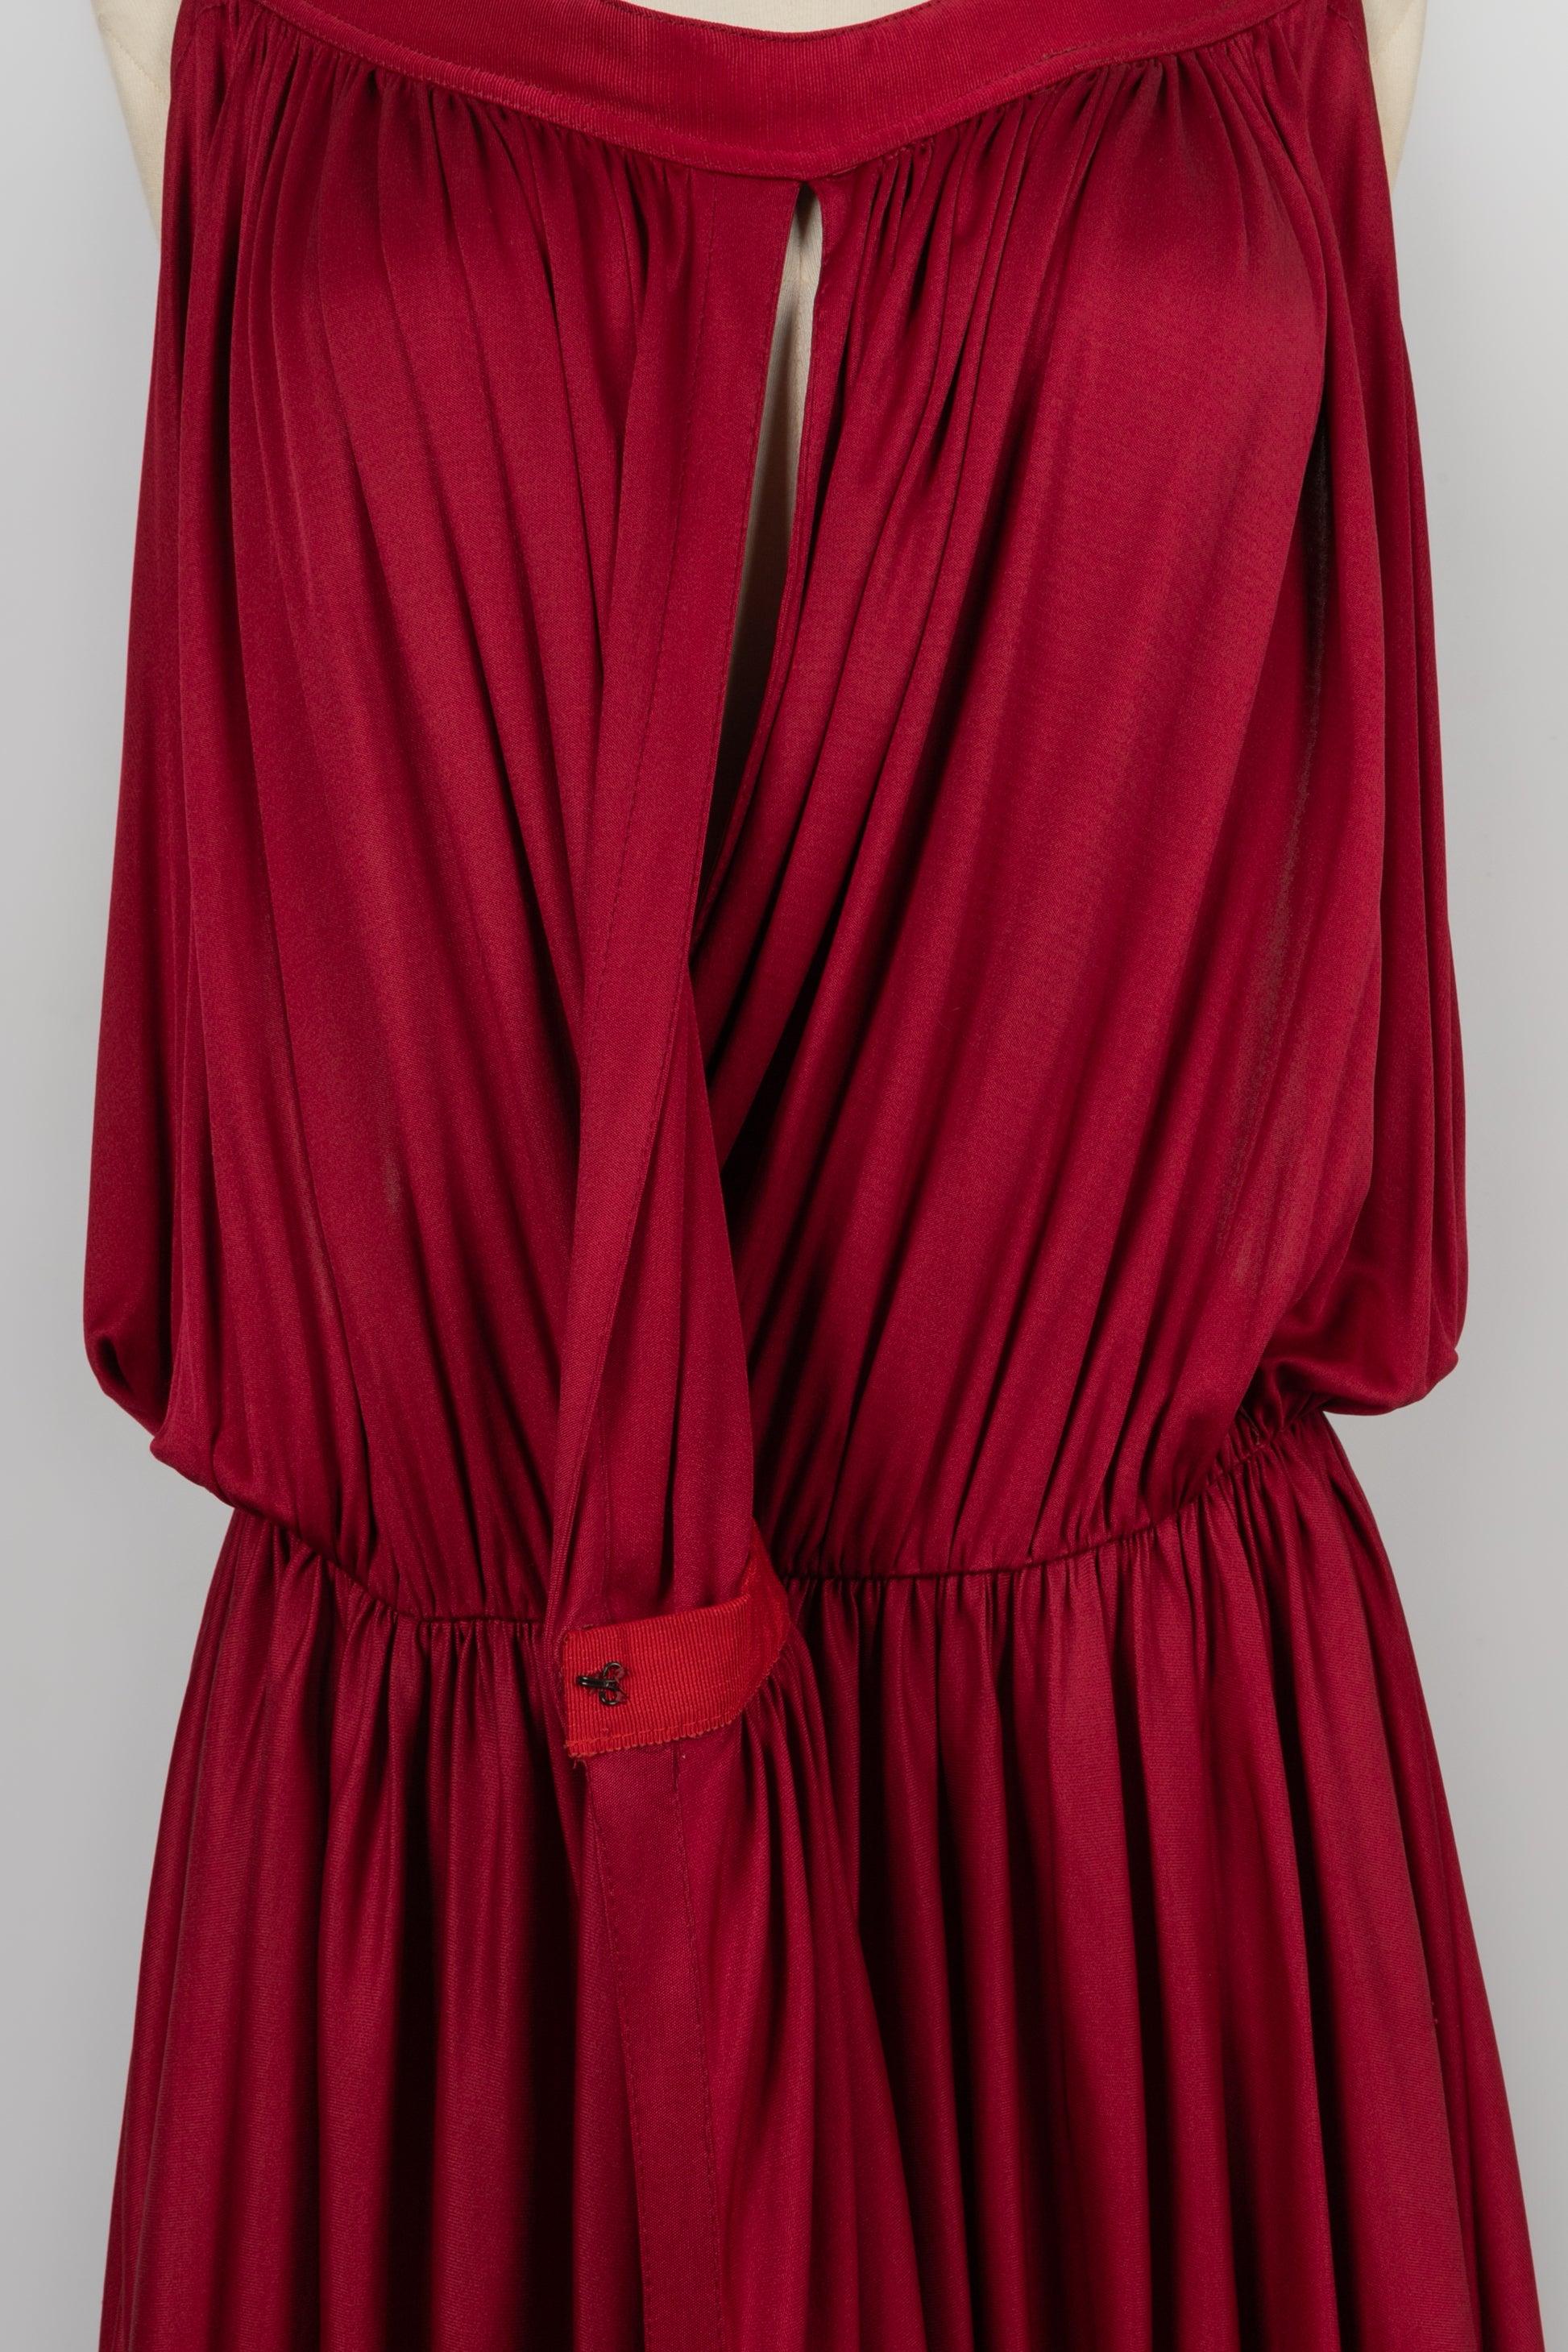 Gianni Versace Silk Pleated Dress, 1980s For Sale 2